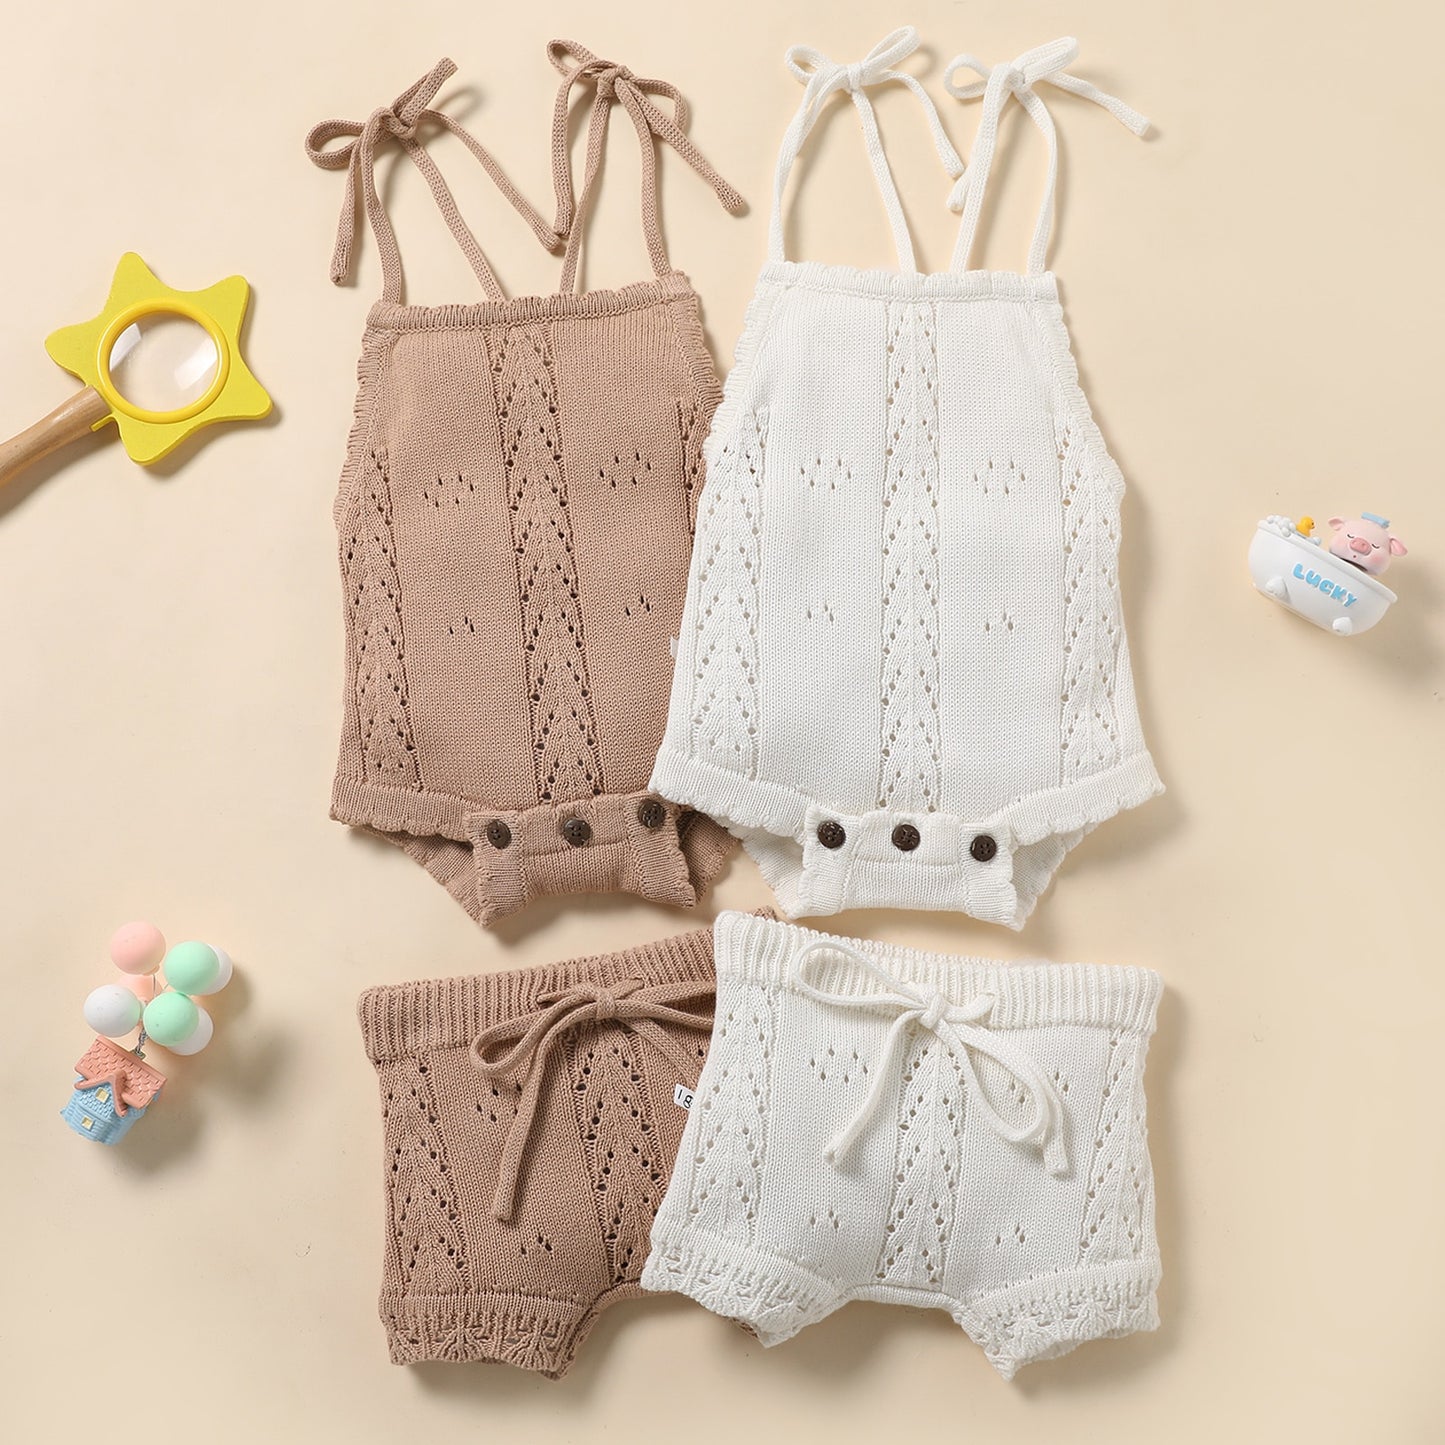 2 Pc Set: Lace-Up Knitted Backless Romper + Drawstring Shorts Outfit Baby Girls